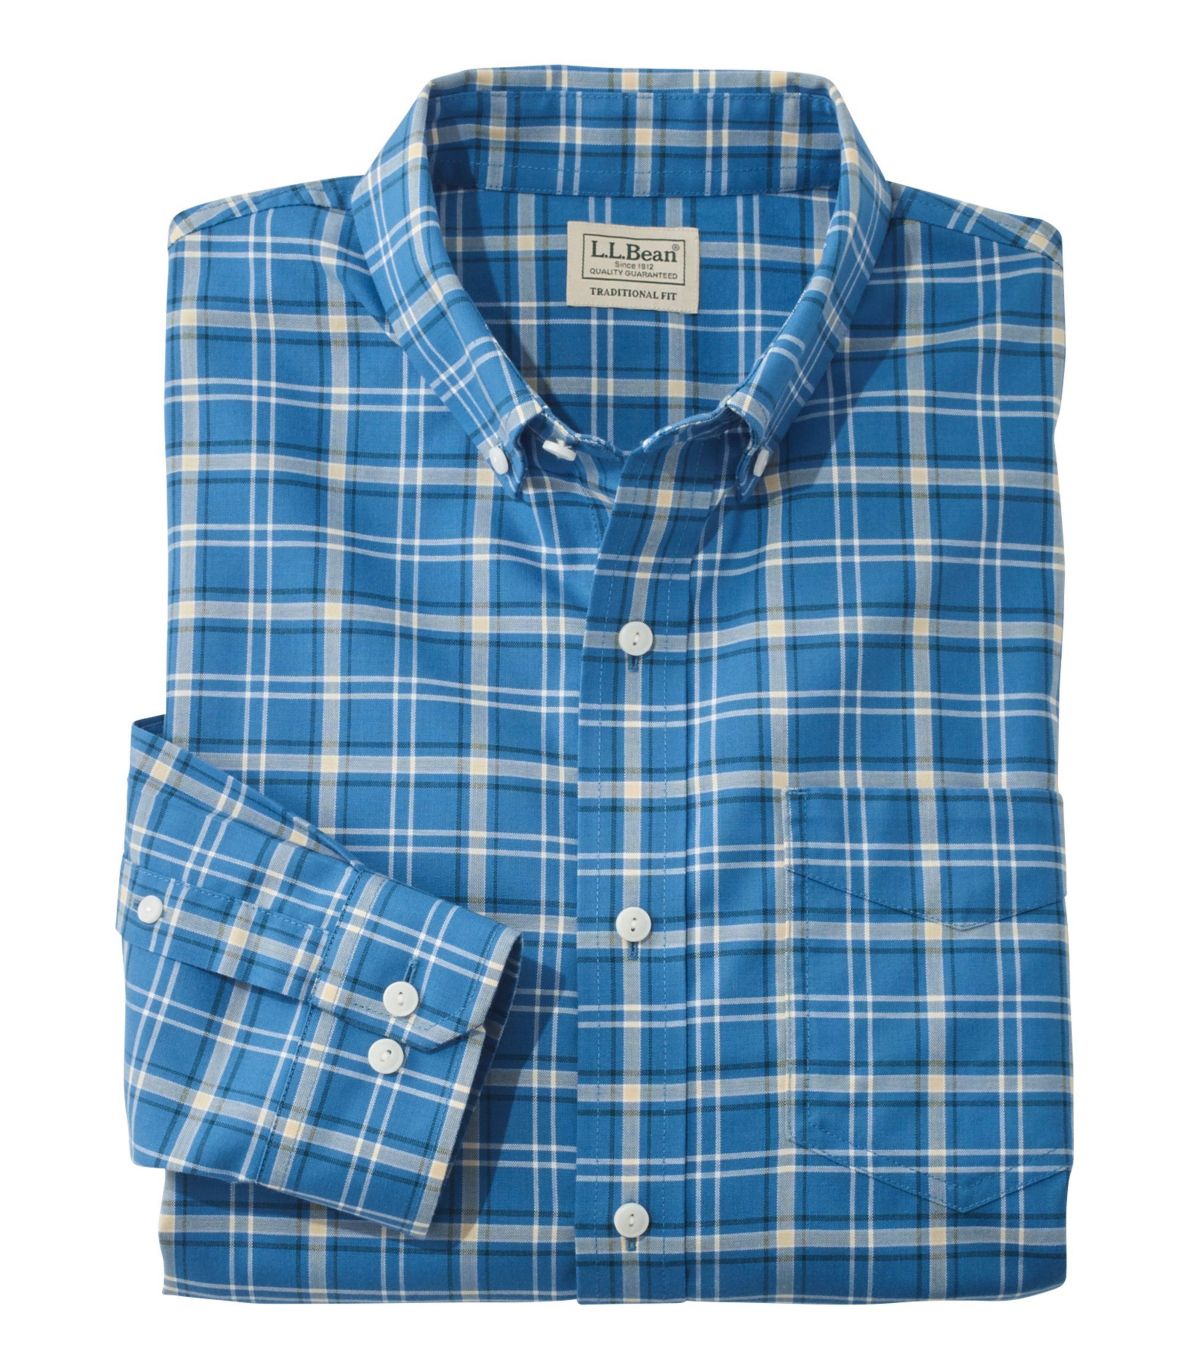 Men's Easy-Care Chambray Shirt, Traditional Fit Plaid at L.L. Bean